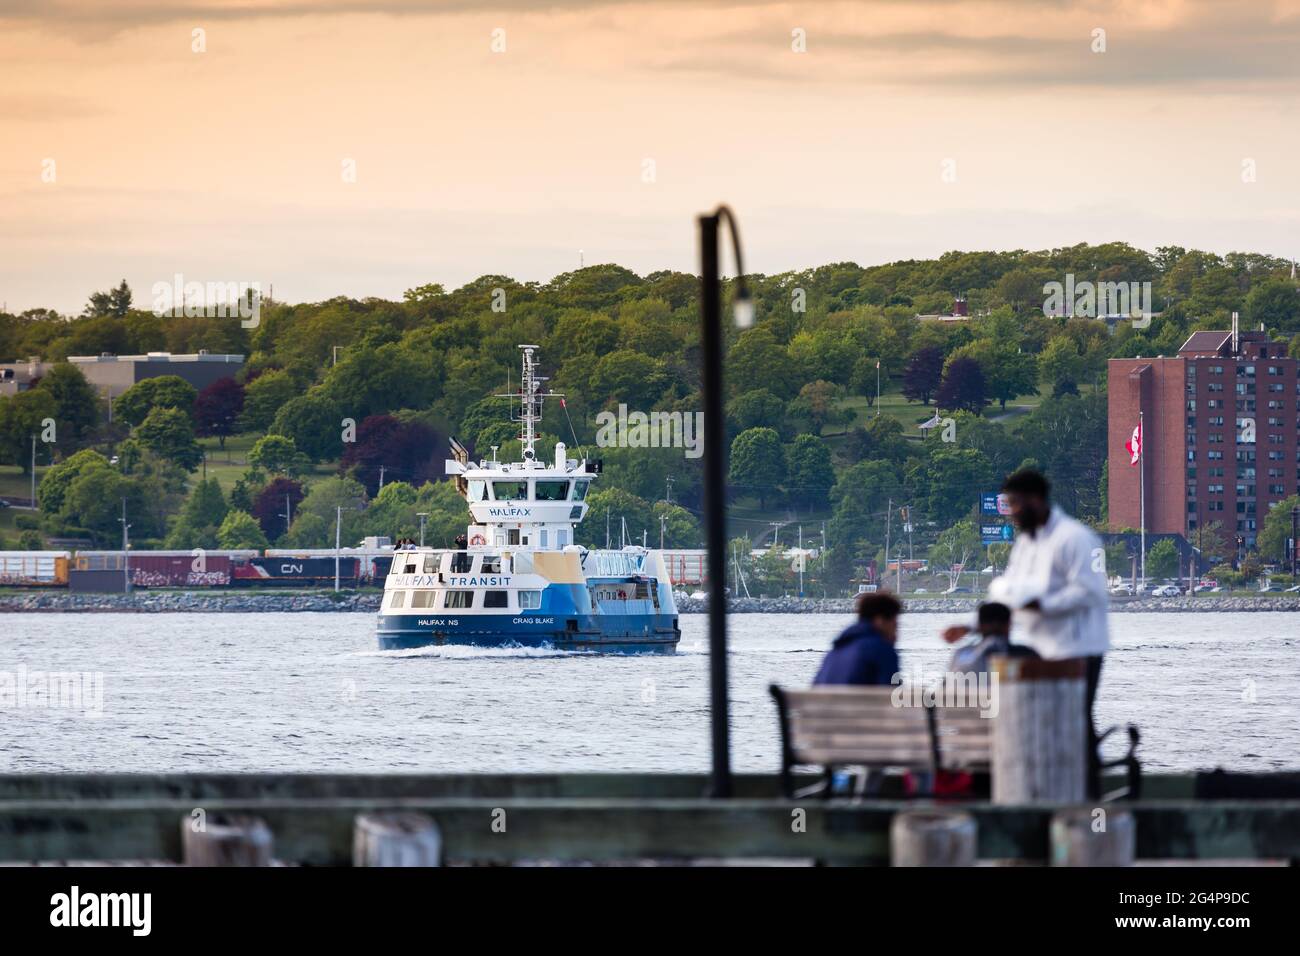 North America's oldest ferry transporting people from Dartmouth to Halifax, Nova Scotia, Canada as seen from the Halifax Harbor front. Stock Photo